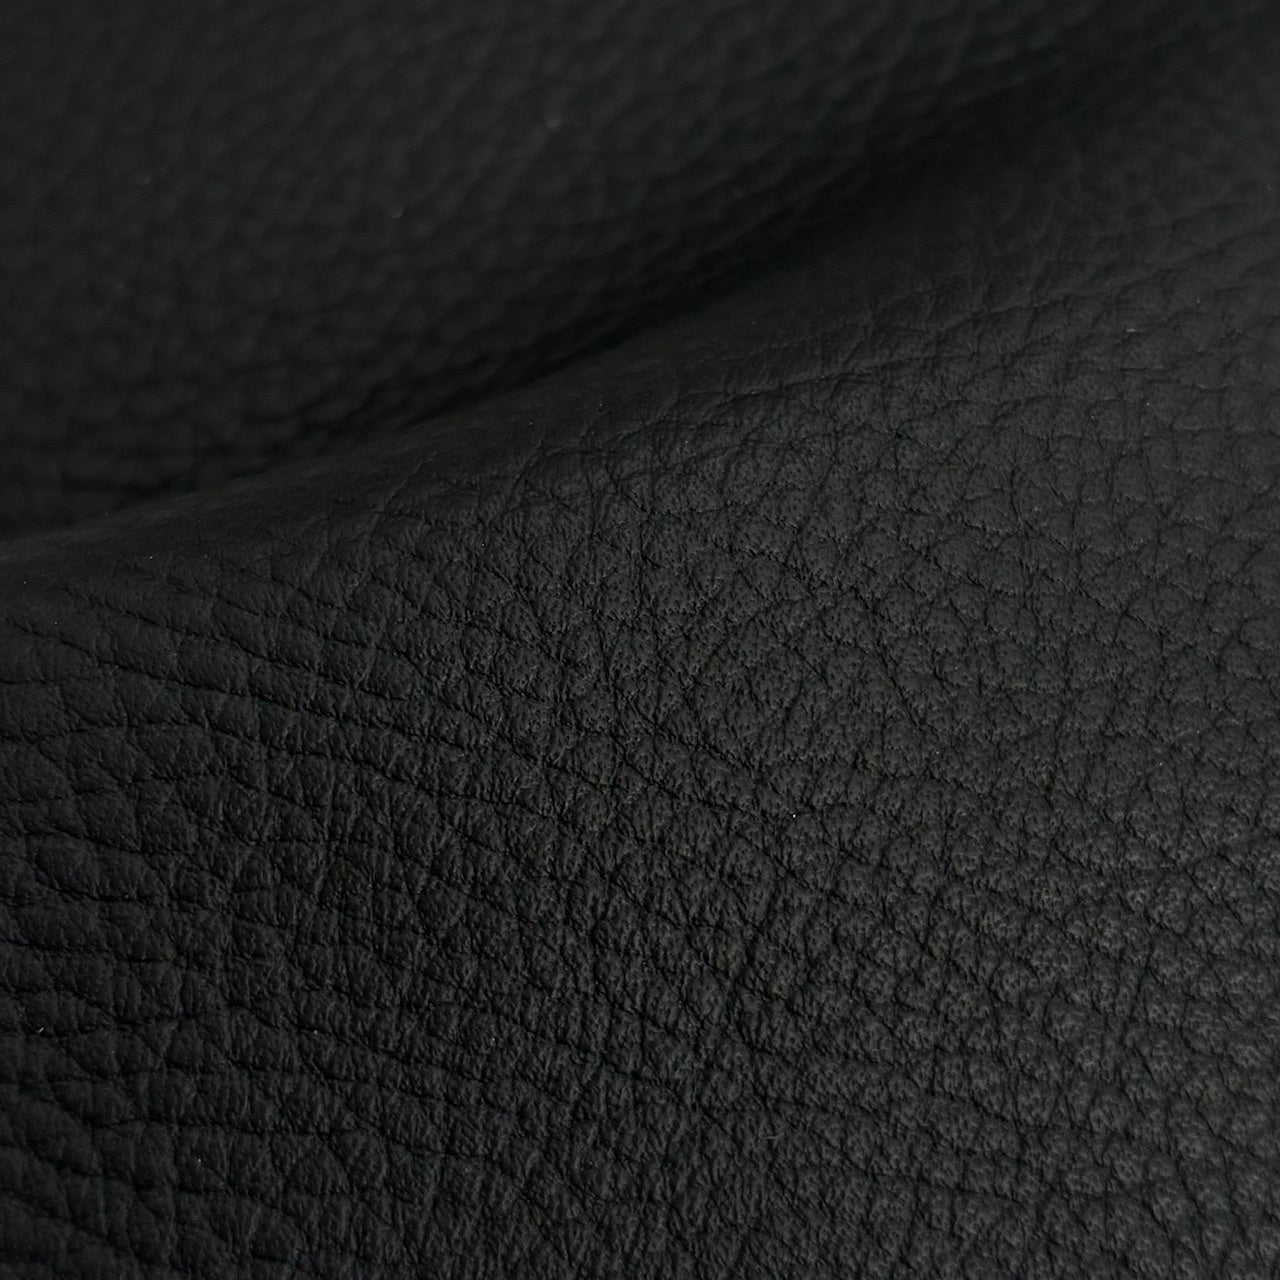 Denver Upholstery Cow Leather